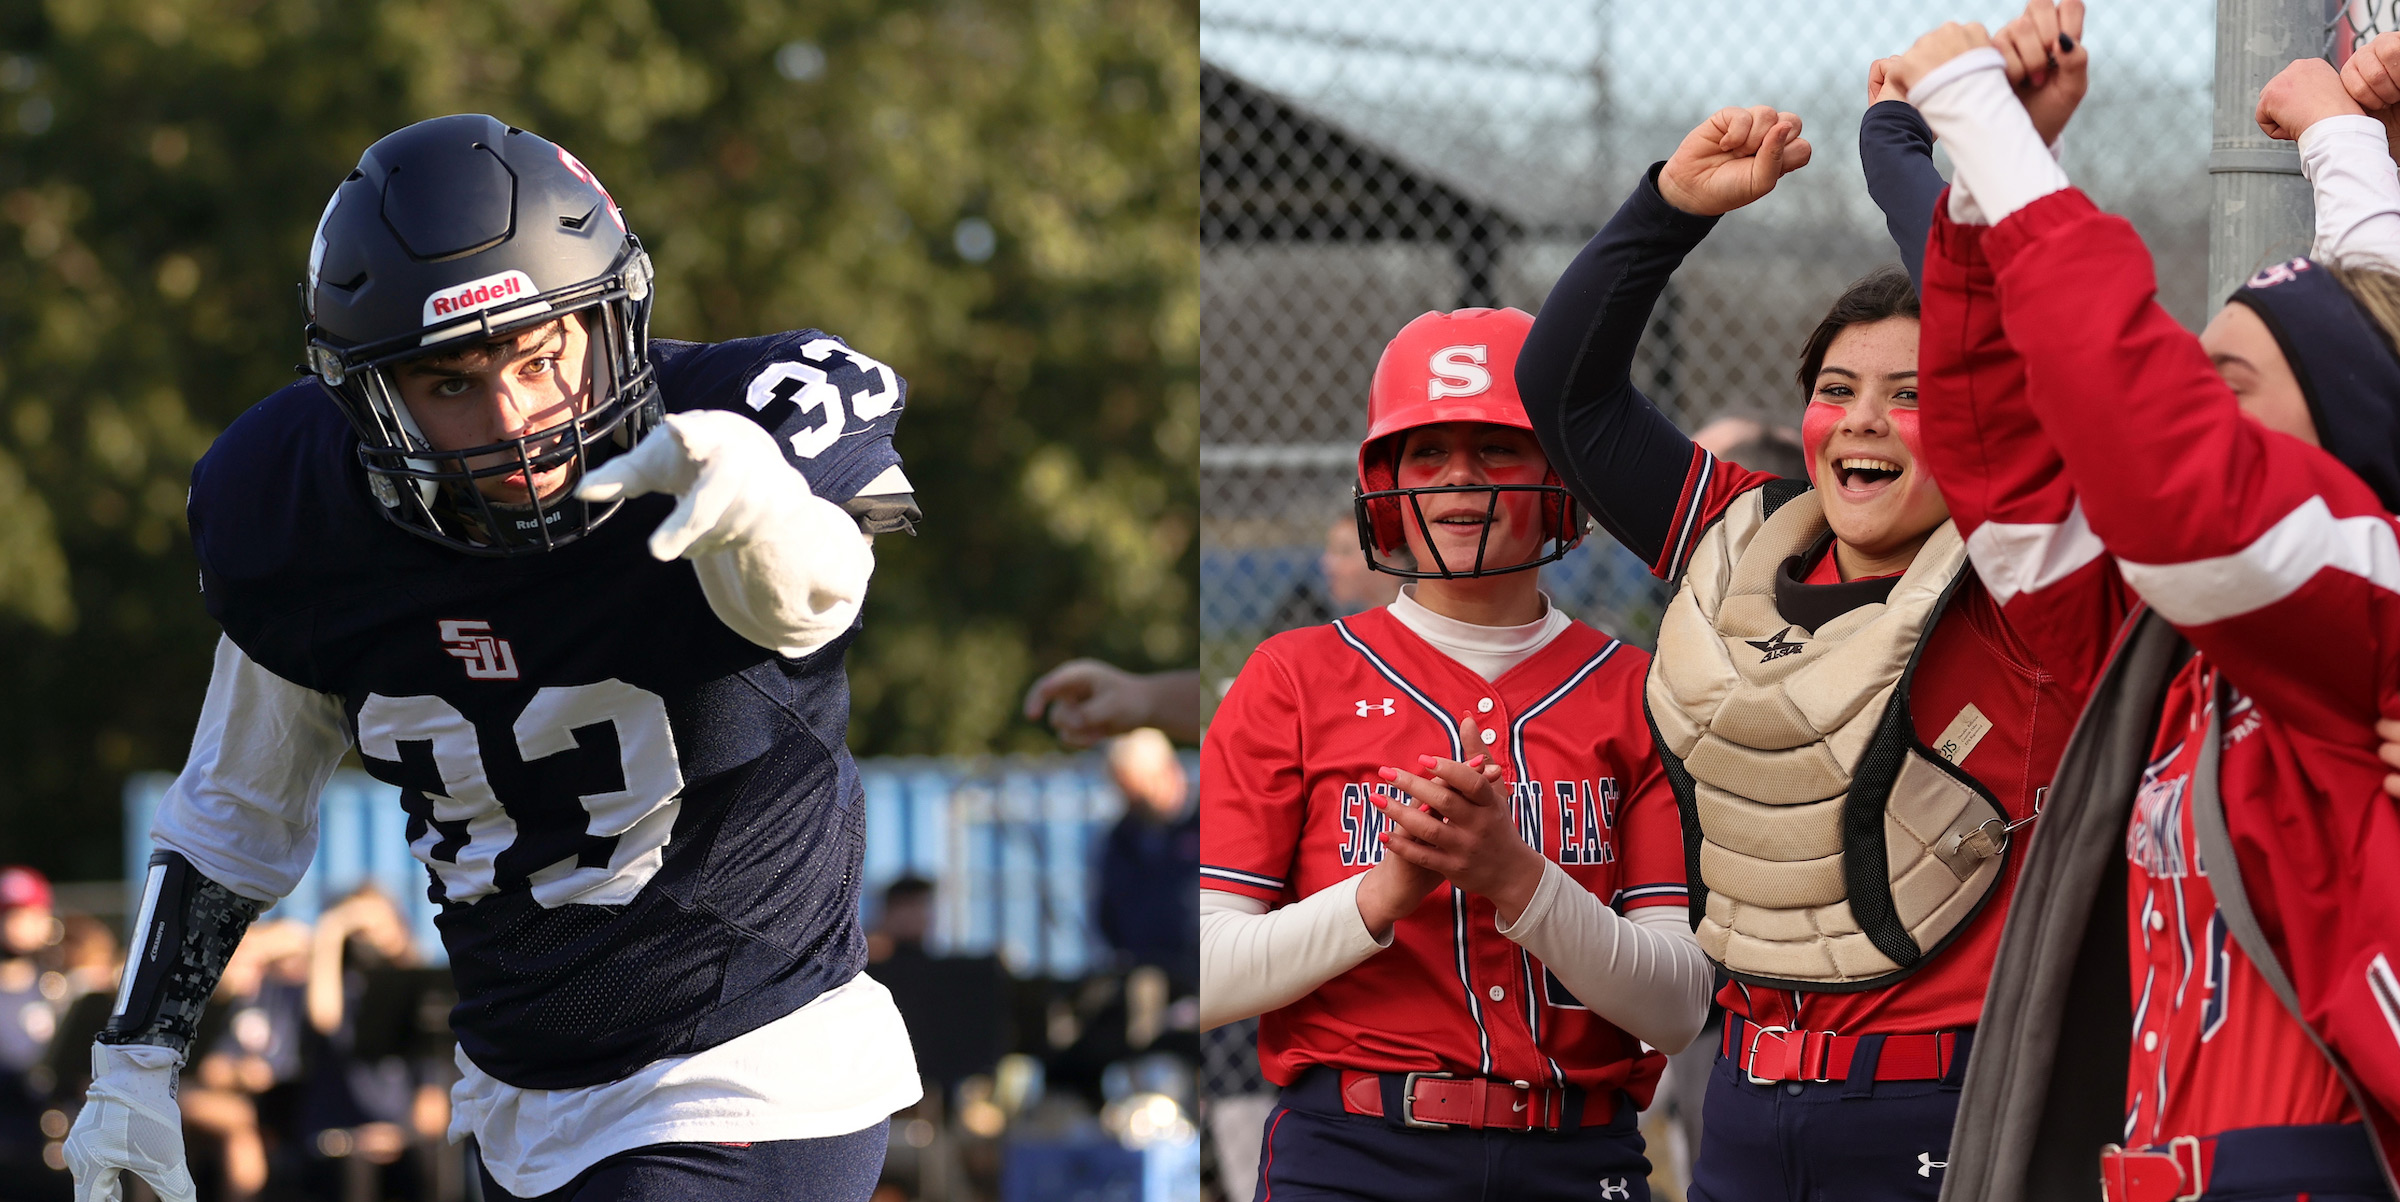 HSW Football Player Pointing at camera (left), HSE softball players cheering